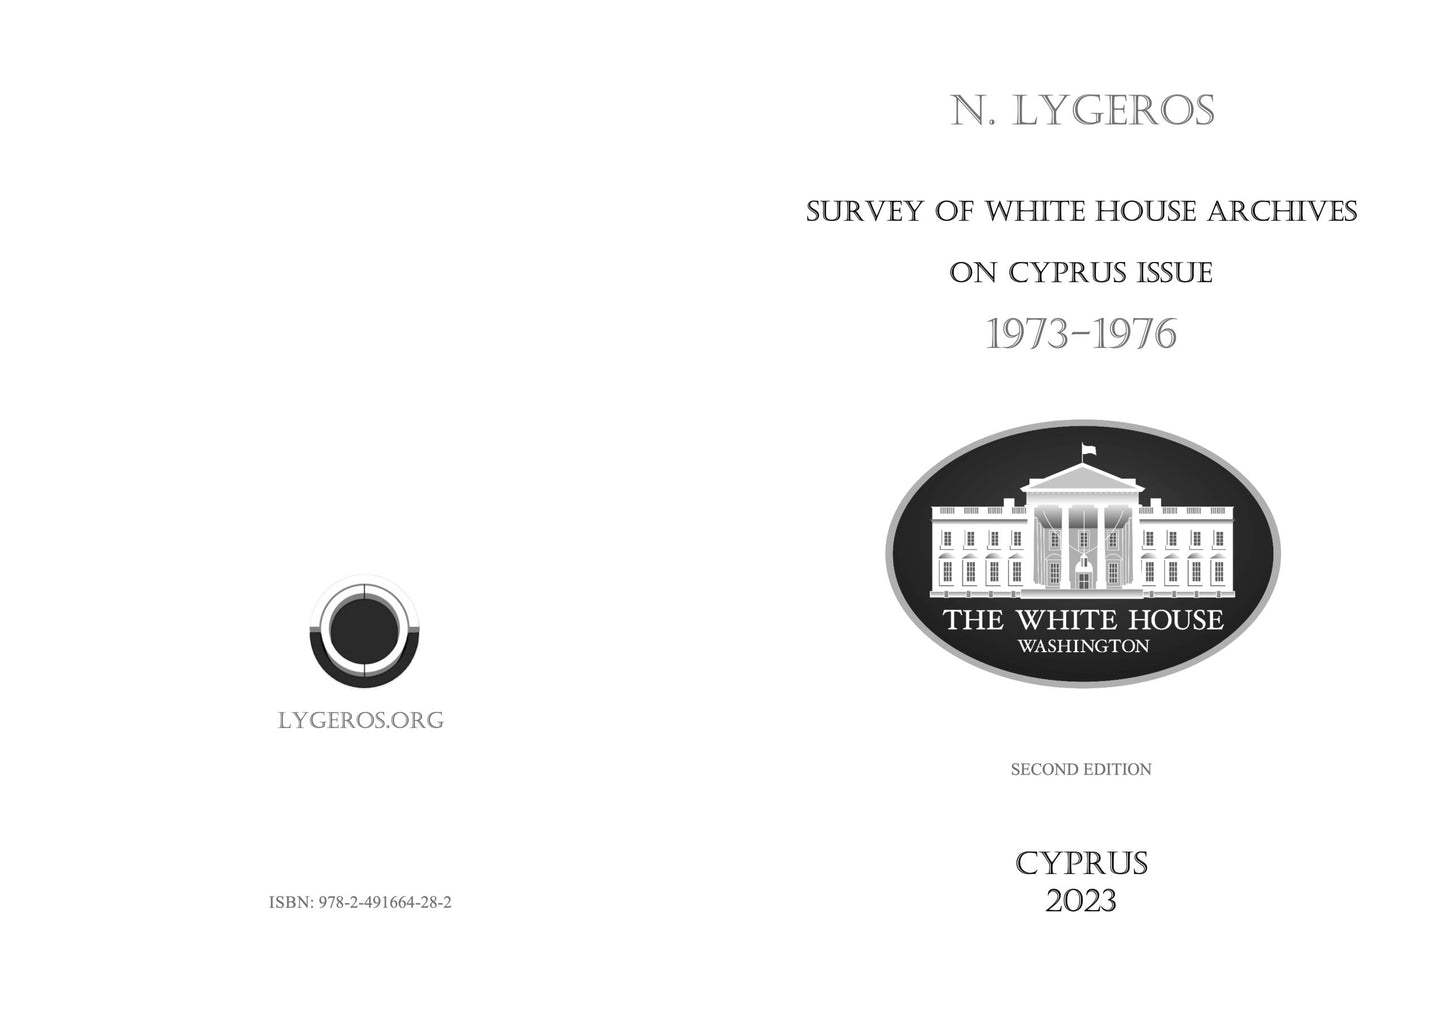 Survey of White House Archives on Cyprus Issue 1973-1976